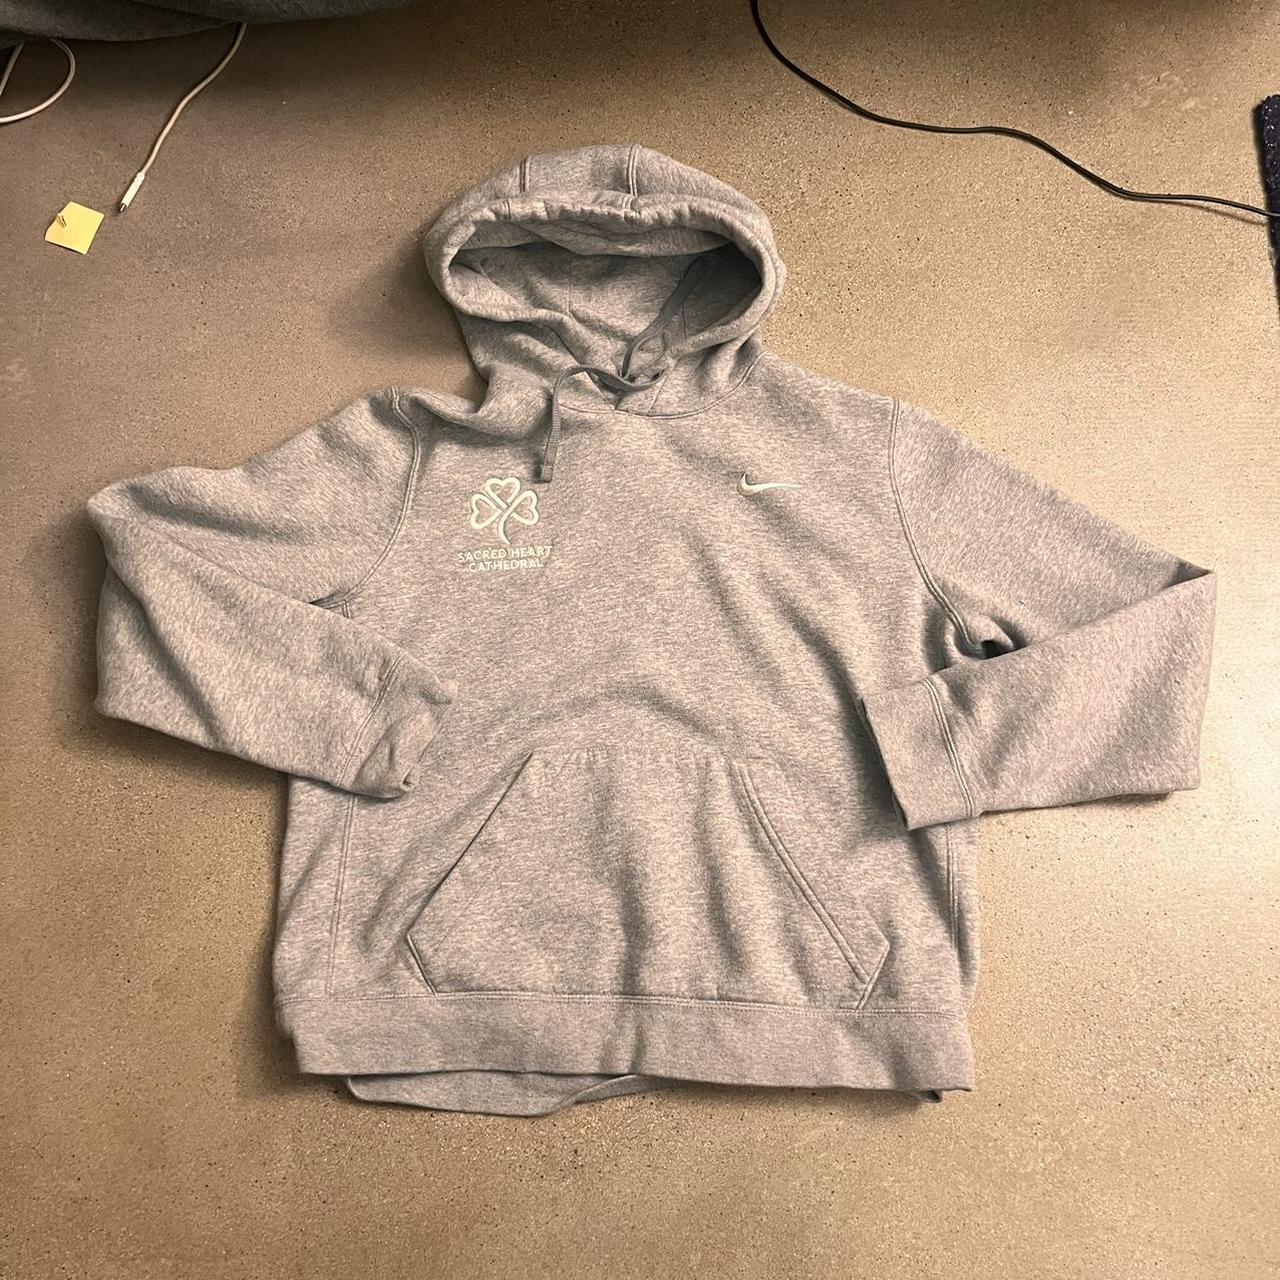 Nike hoodie size medium fits small Dm for info - Depop